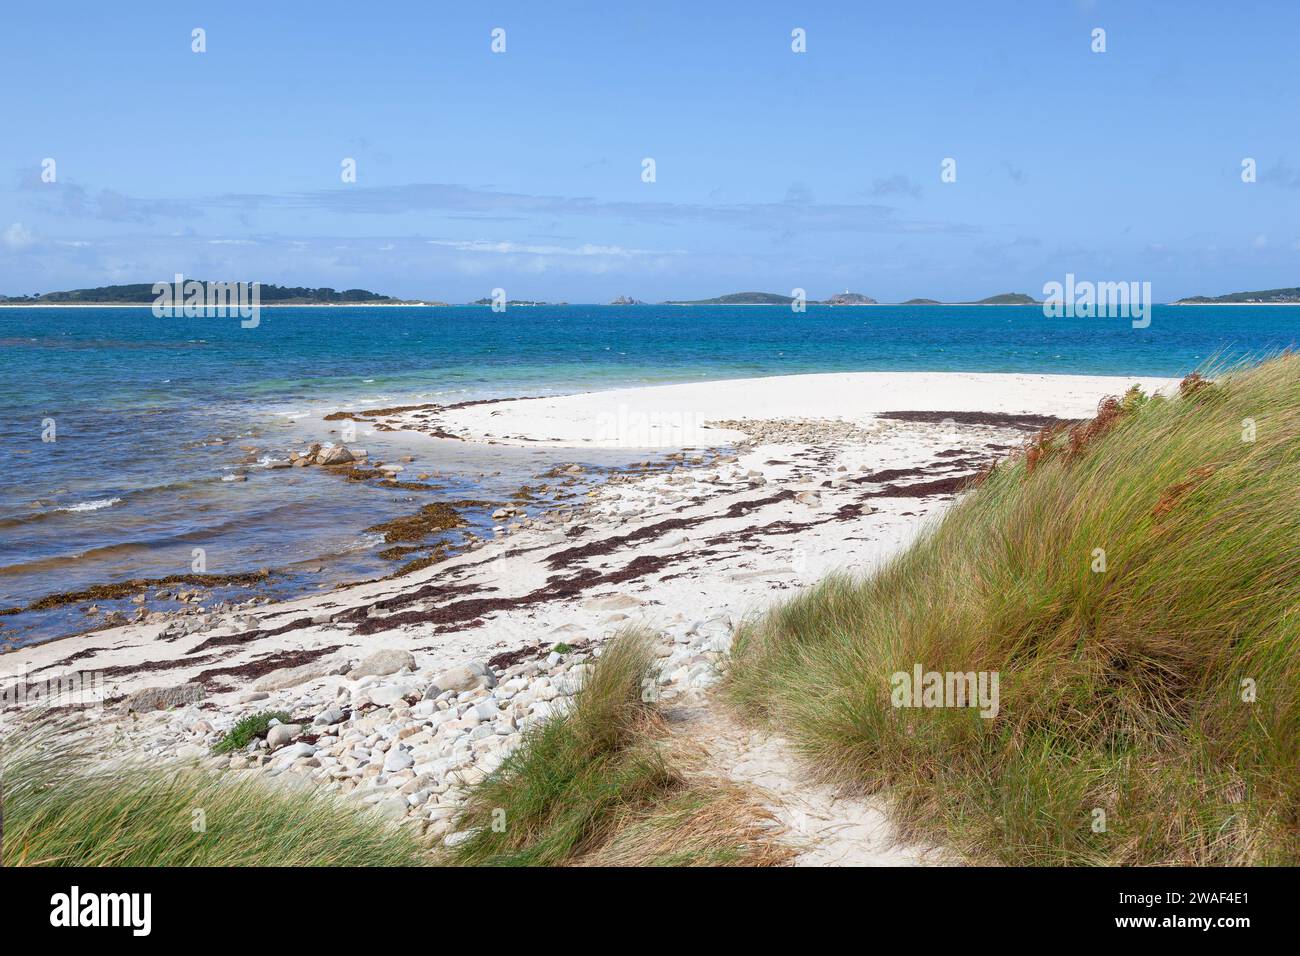 Bar Point Beach, St Mary's, Isles of Scilly, Inghilterra, Regno Unito Foto Stock